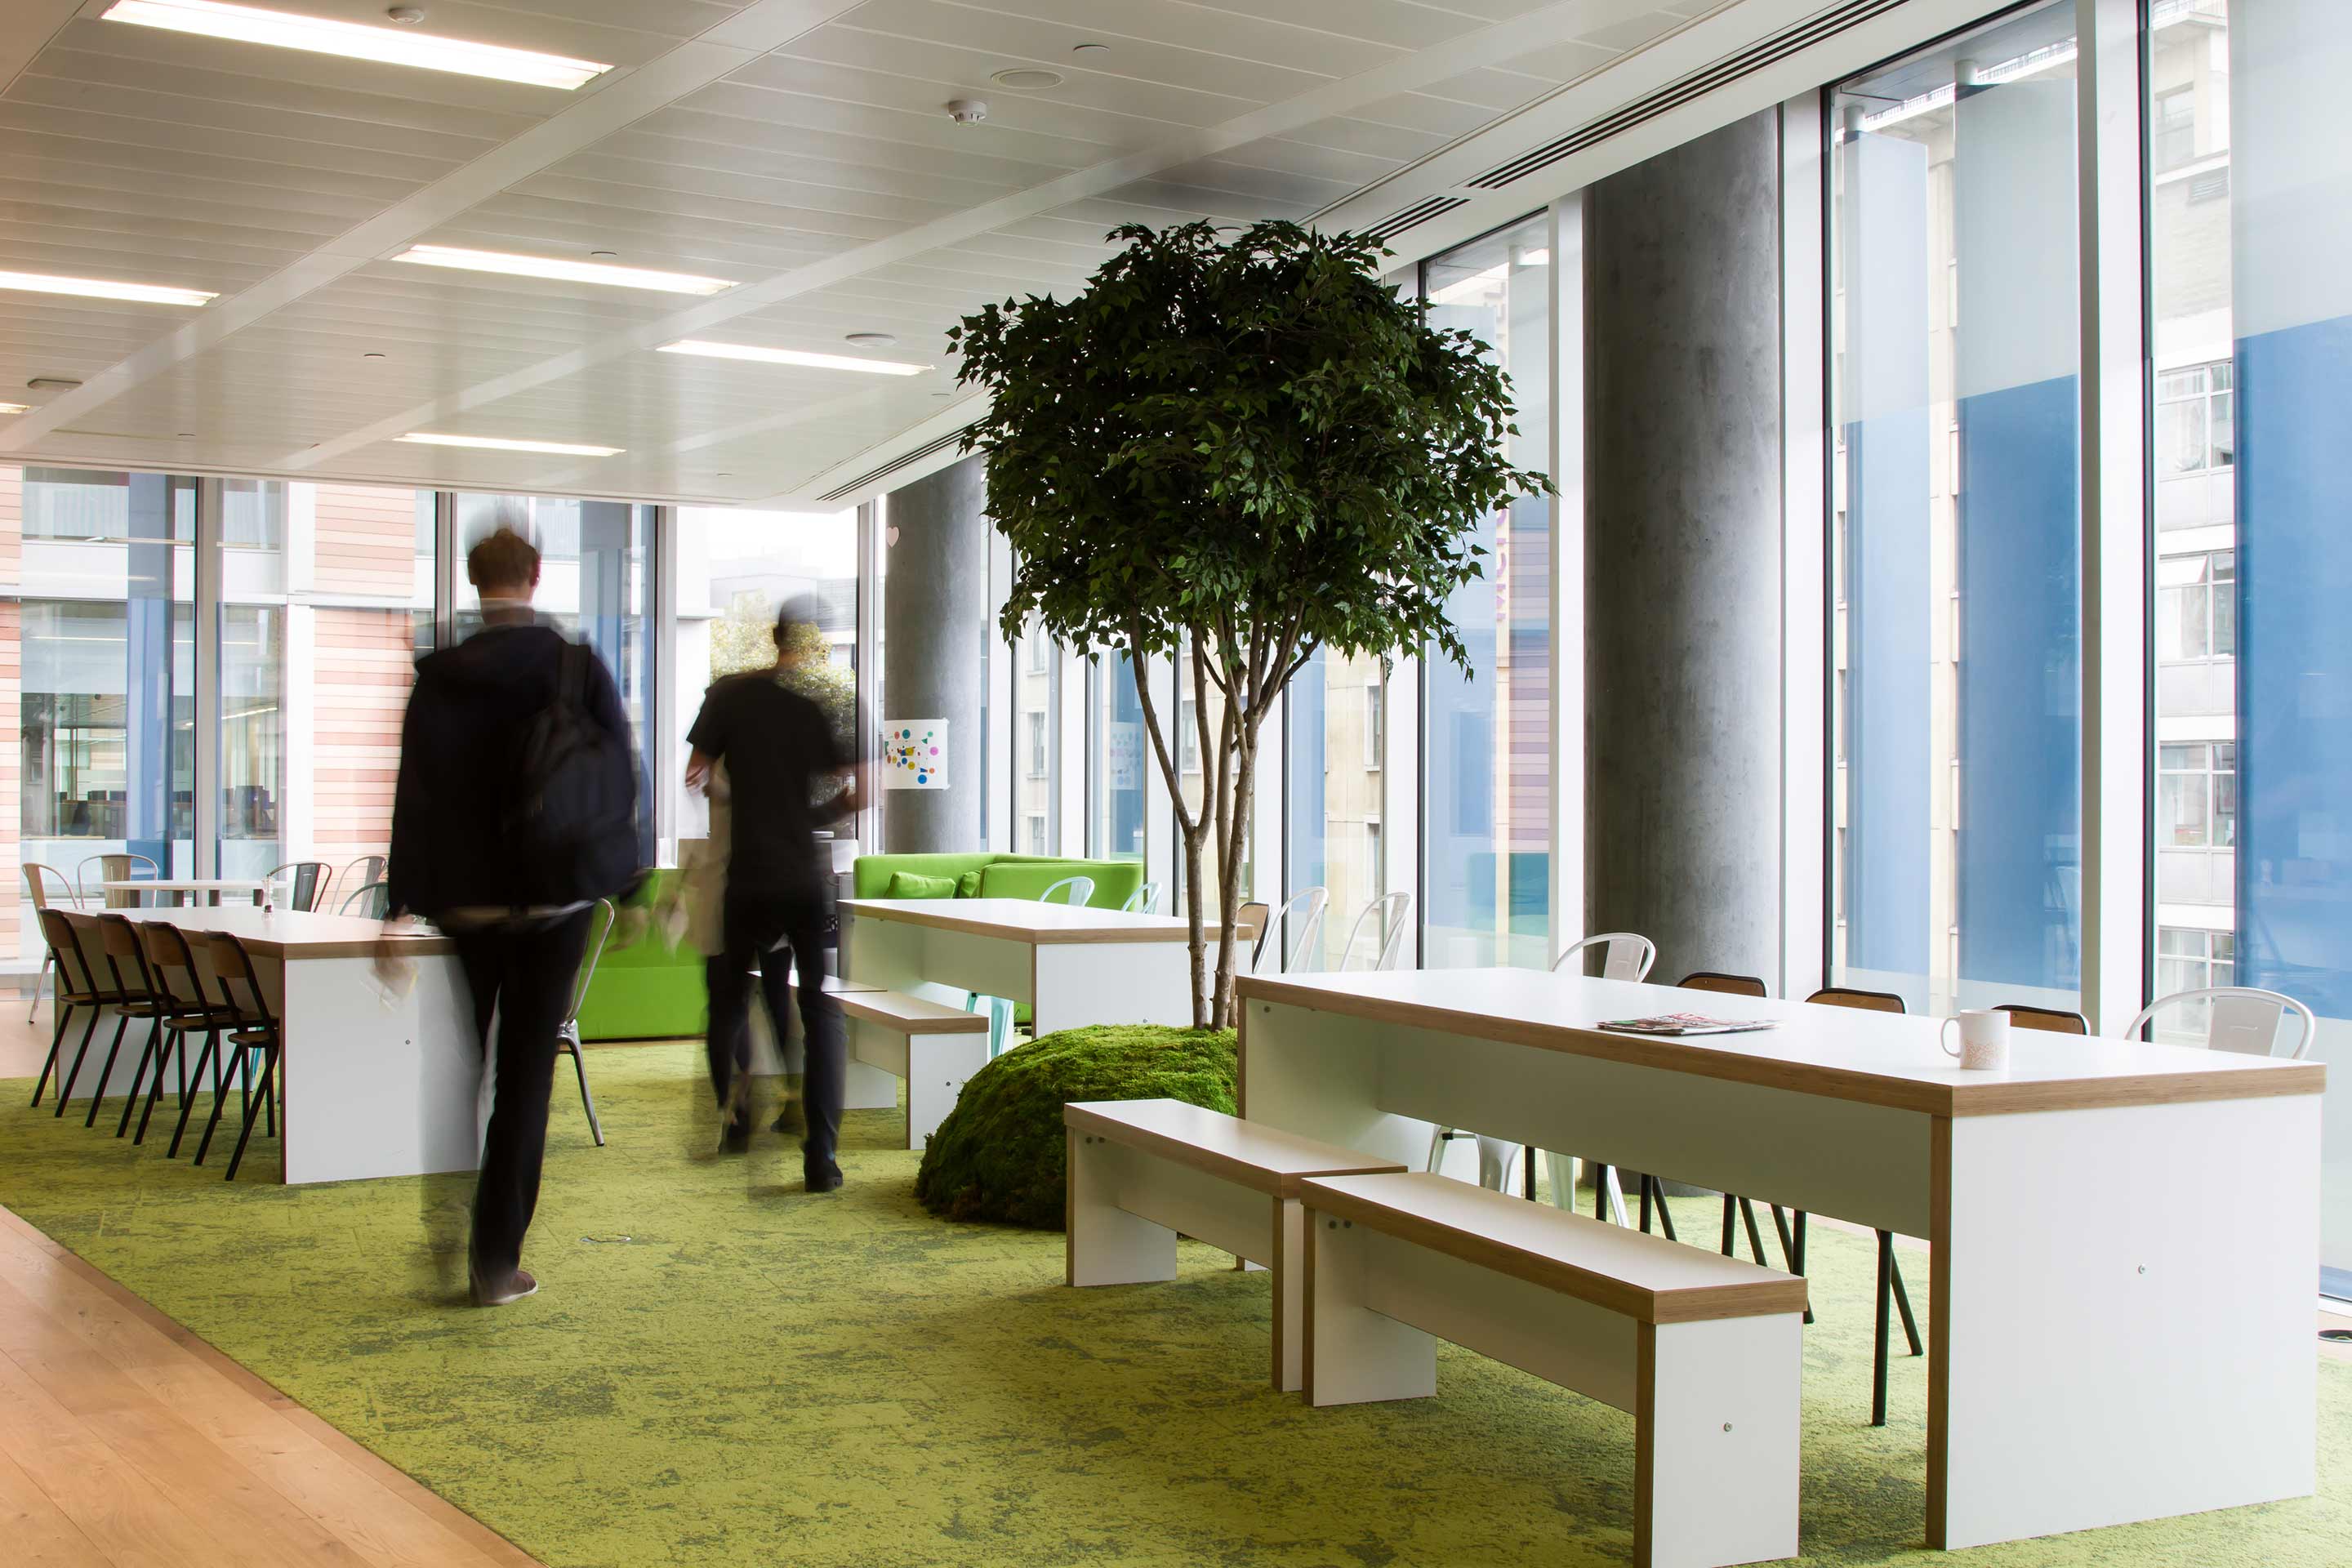 Biophilic design incorporated into social spaces